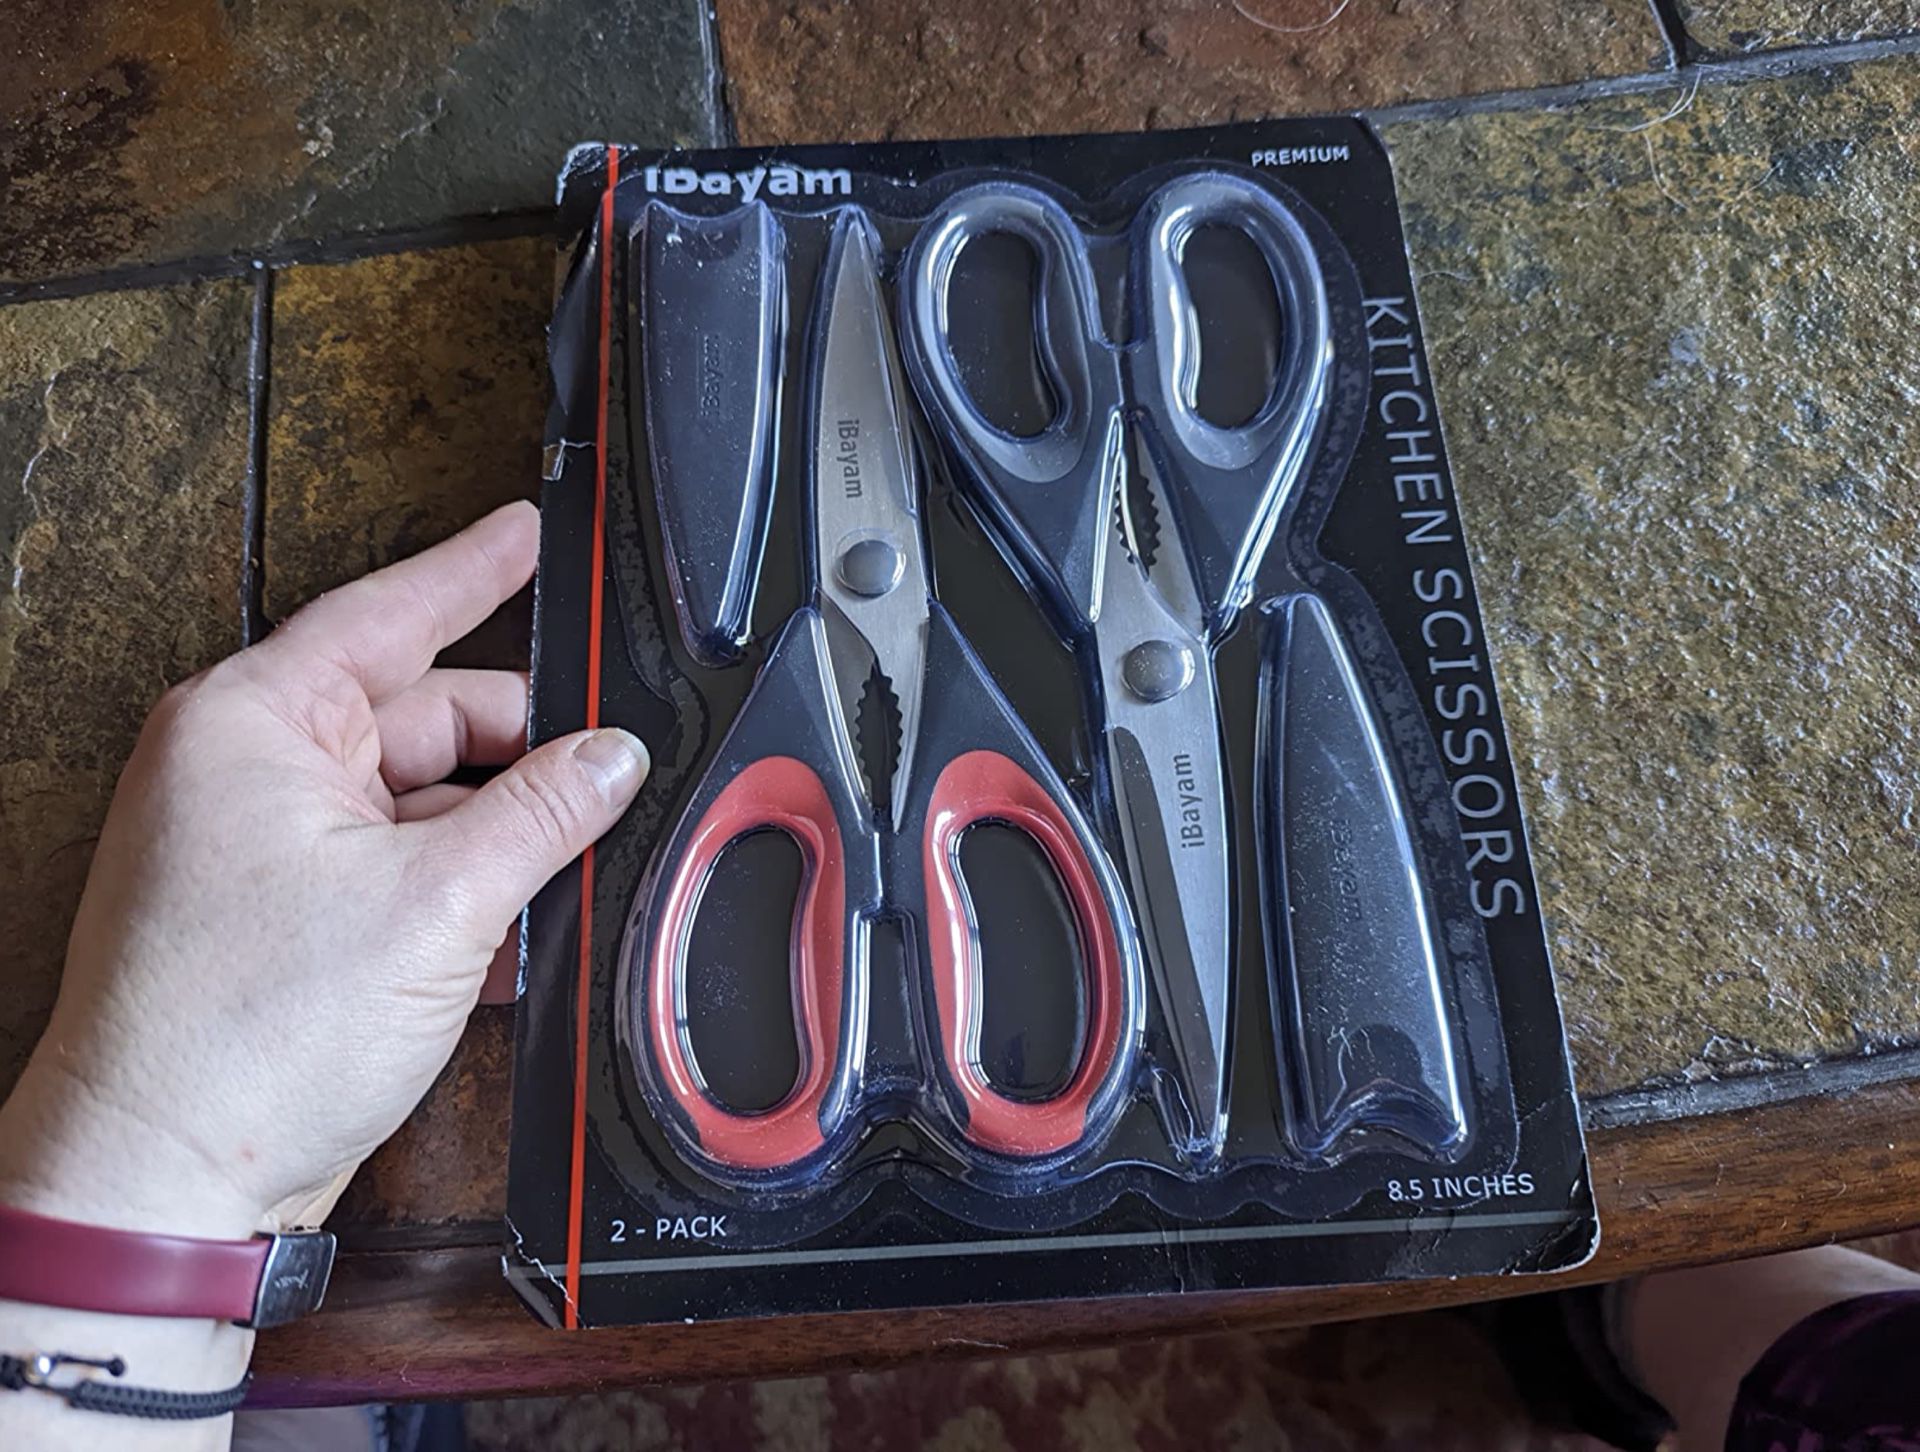 2 Pack Kitchen Shears - Scissors Heavy Duty Meat Poultry Shears - All Purpose Stainless Steel Utility Scissors (Black Gray, Red)